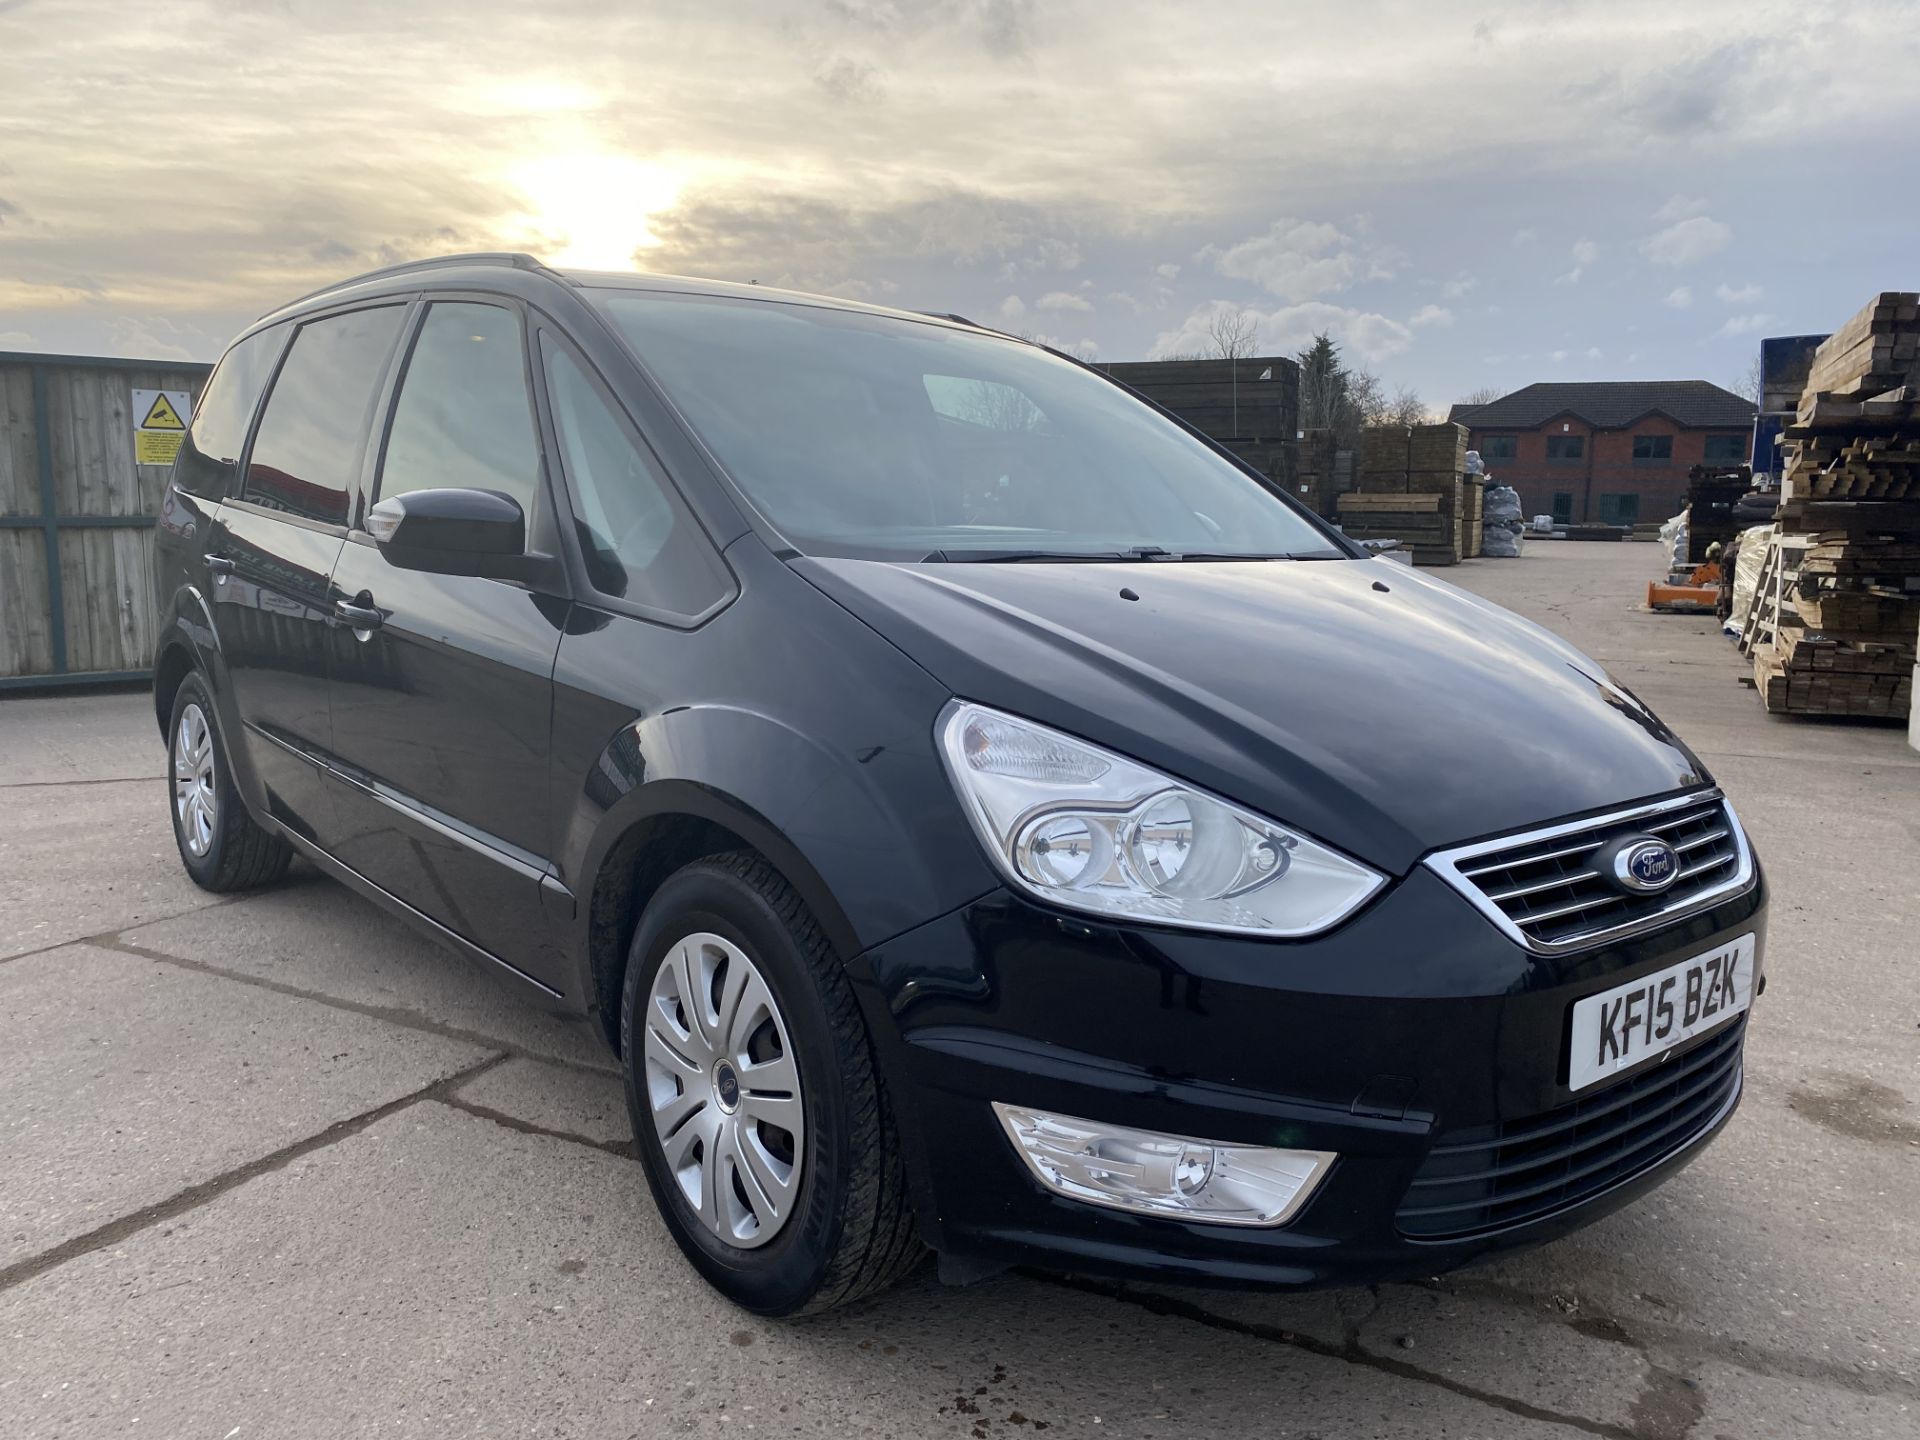 On Sale FORD GALAXY "ZETEC" 2.0TDCI "AUTO" 15 REG - 7 SEATER- LEATHER - AIR CON - MET BLACK - NO VAT - Image 2 of 24